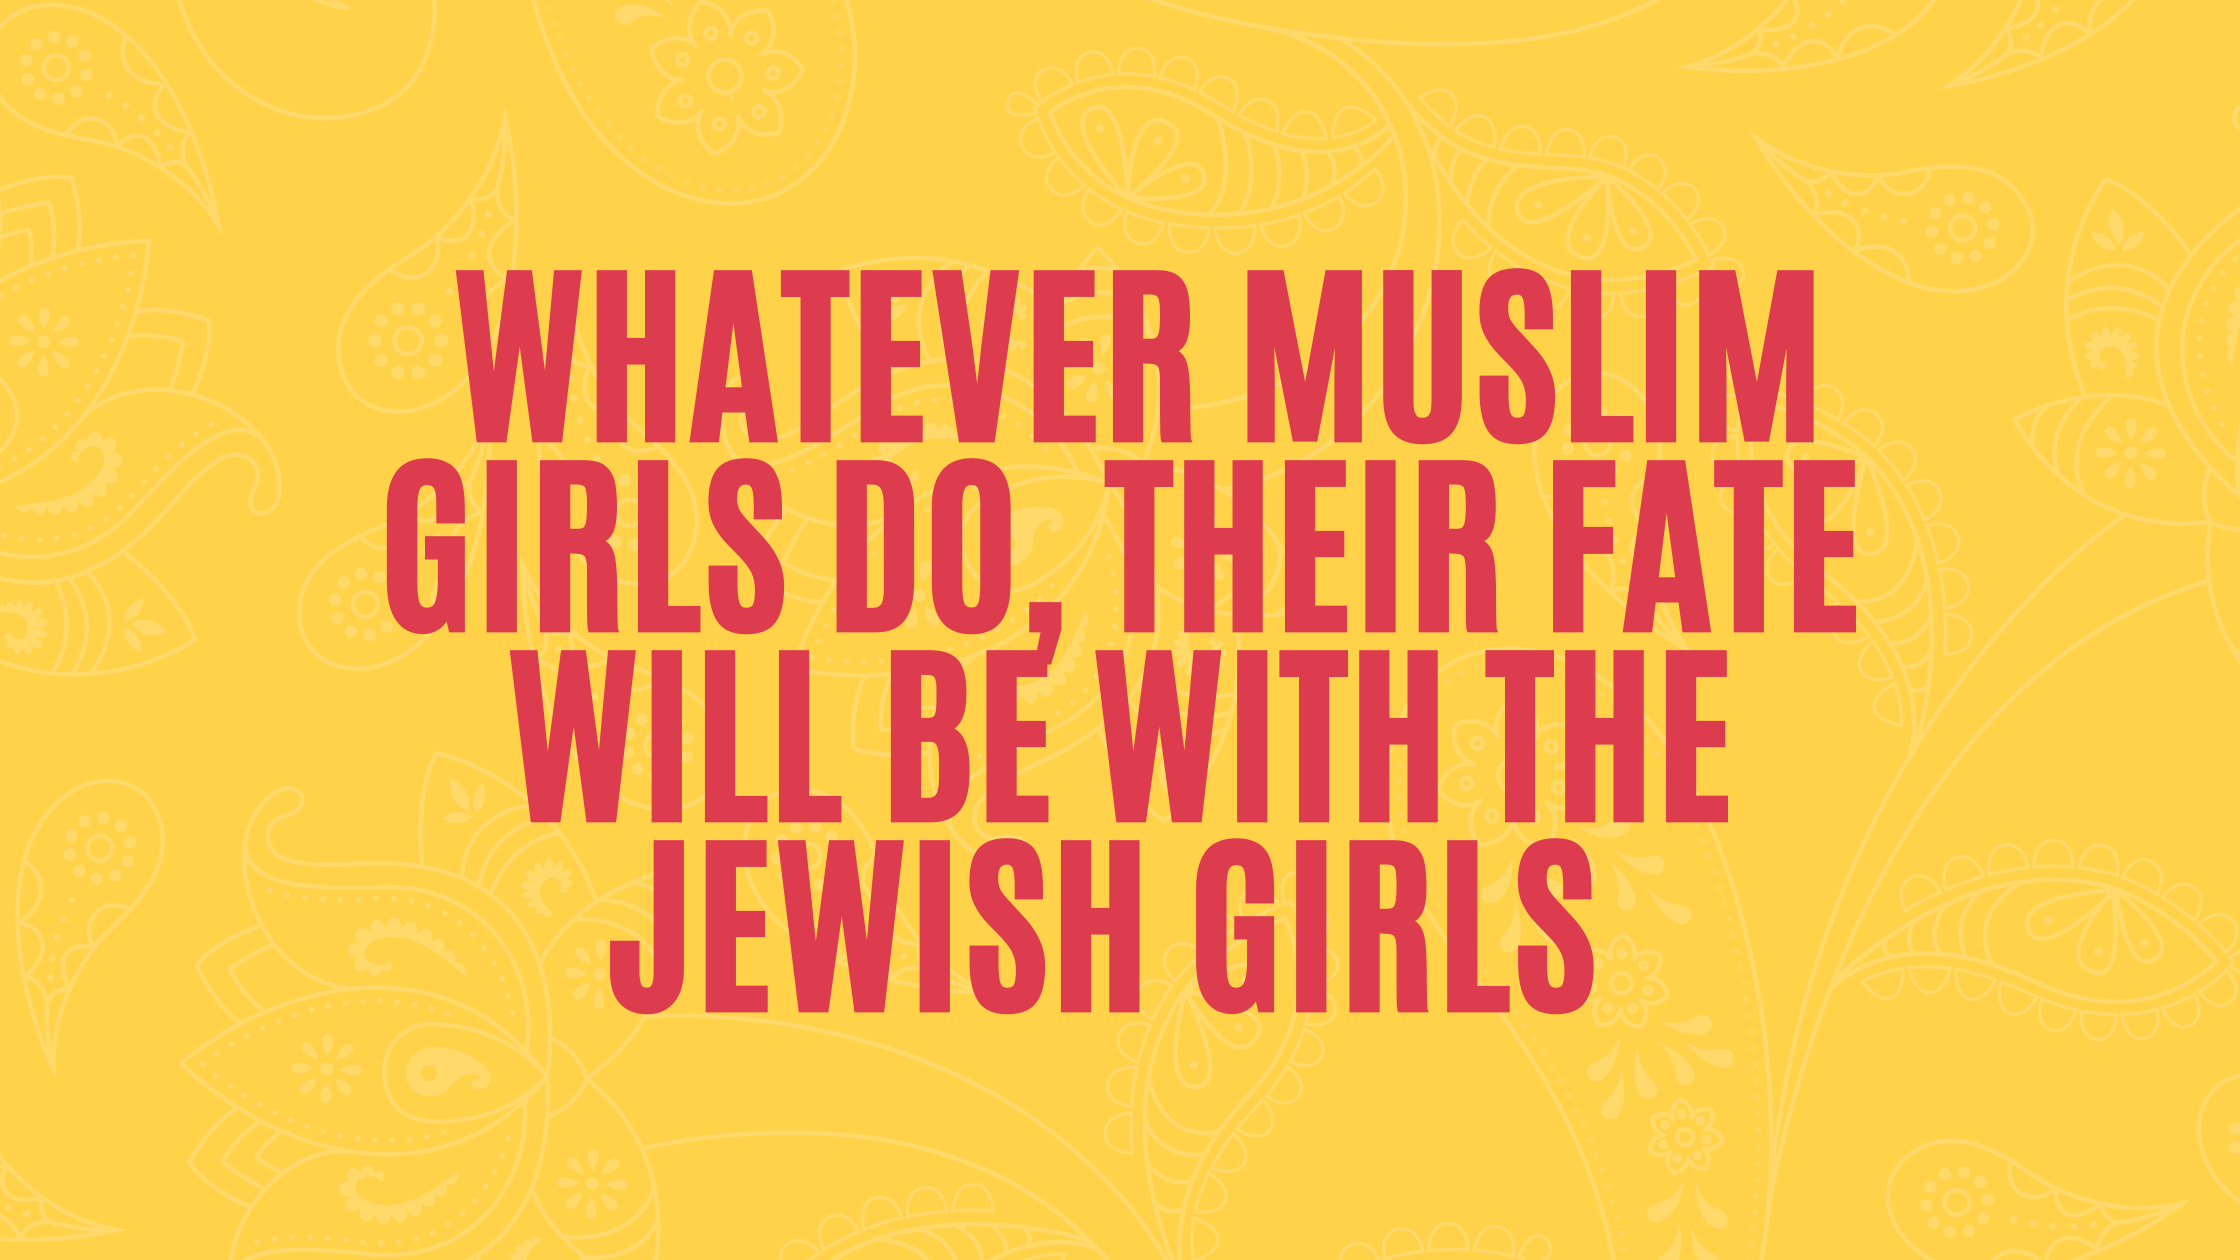  Whatever Muslim girls do, their fate will be with the Jewish girls 